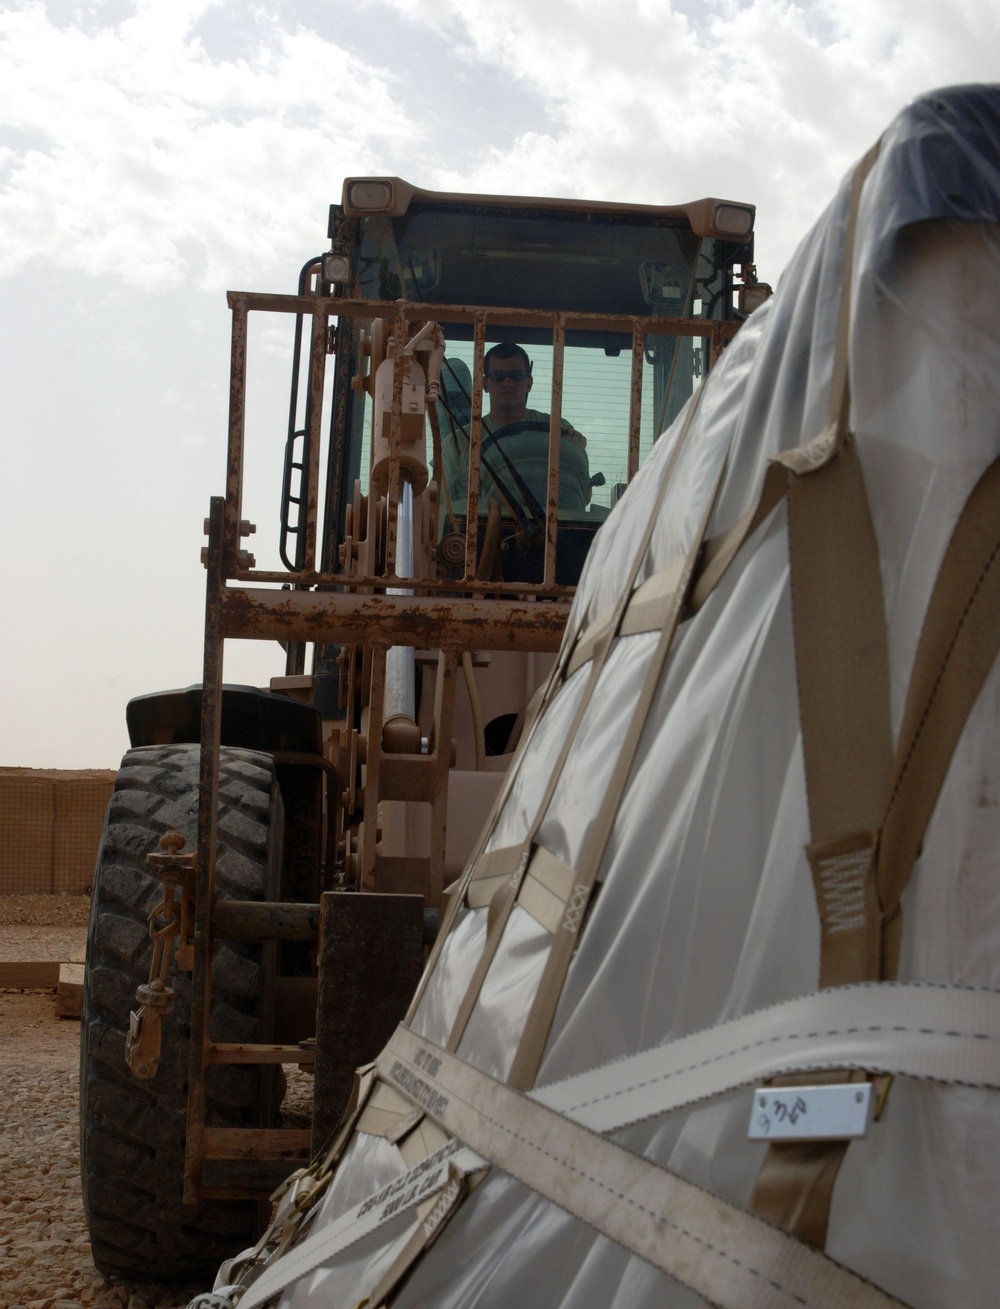 Aerial porters make history, unload cargo for all of Iraq